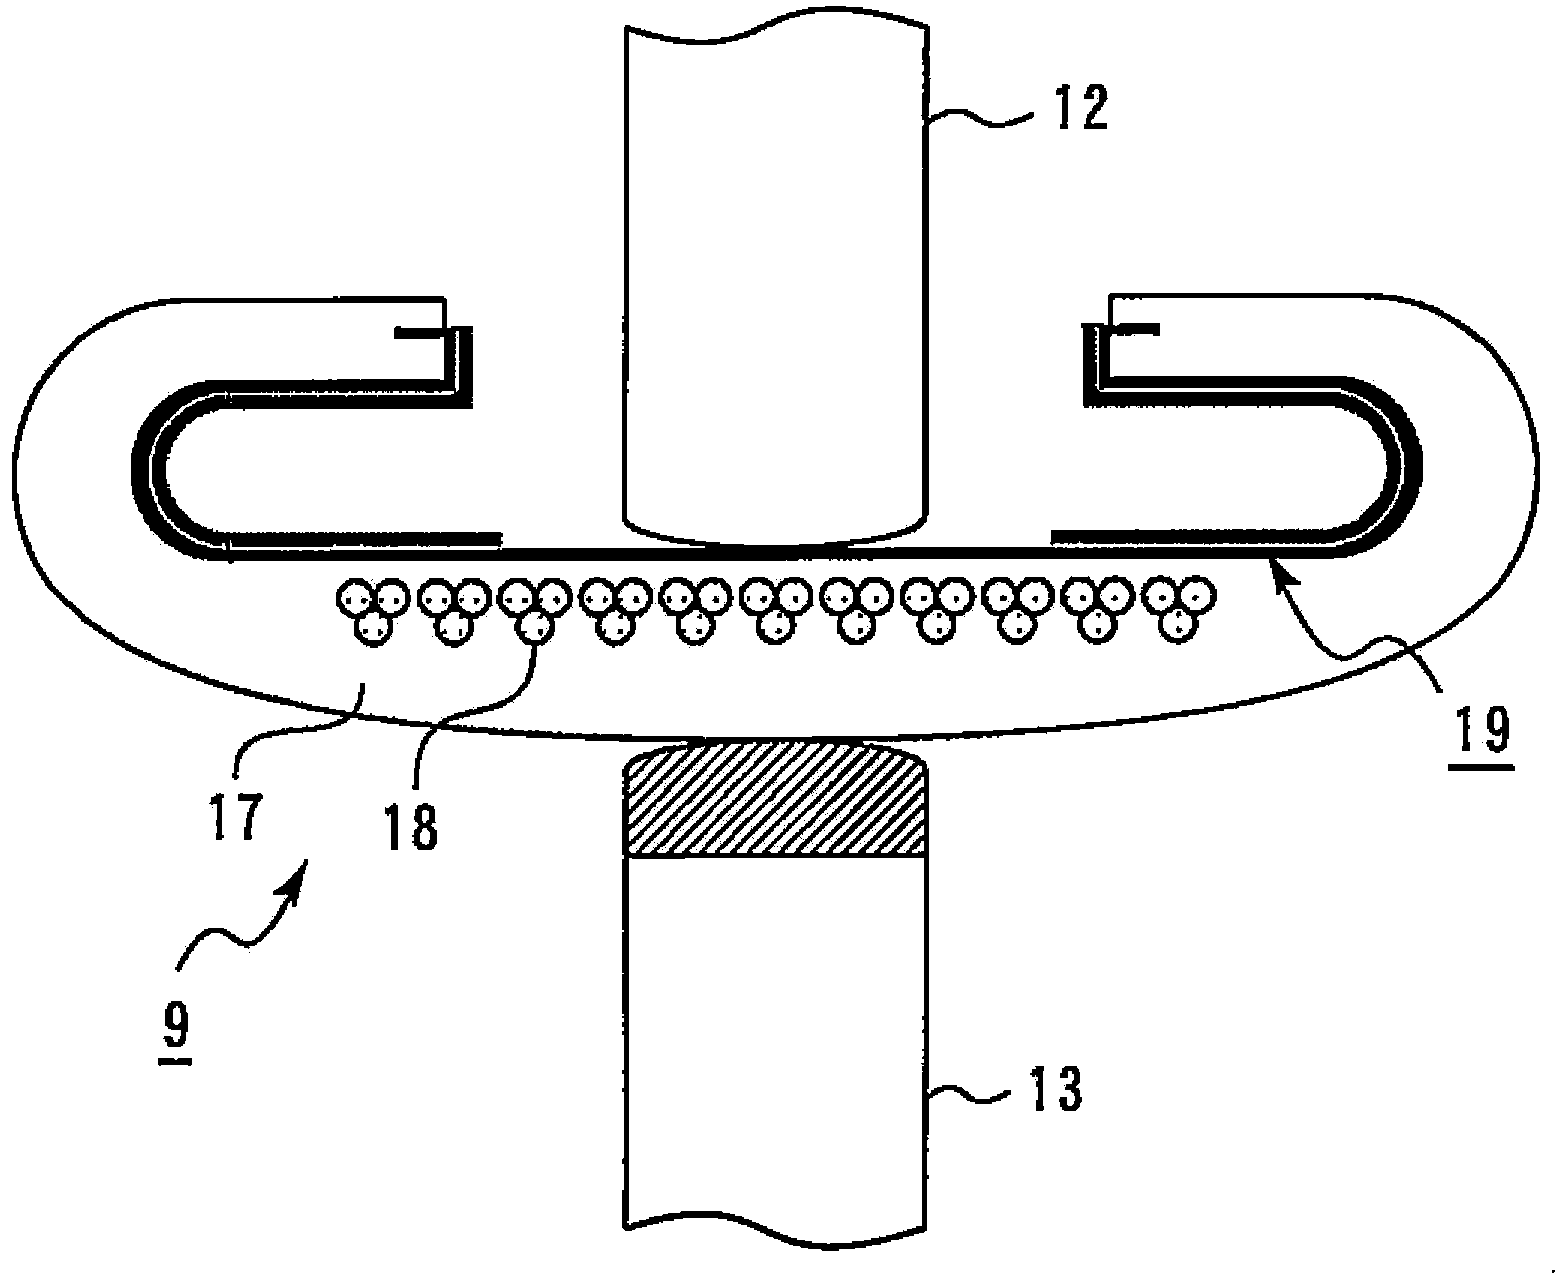 Movable armrest of passenger conveyer and armrest for passenger conveyer